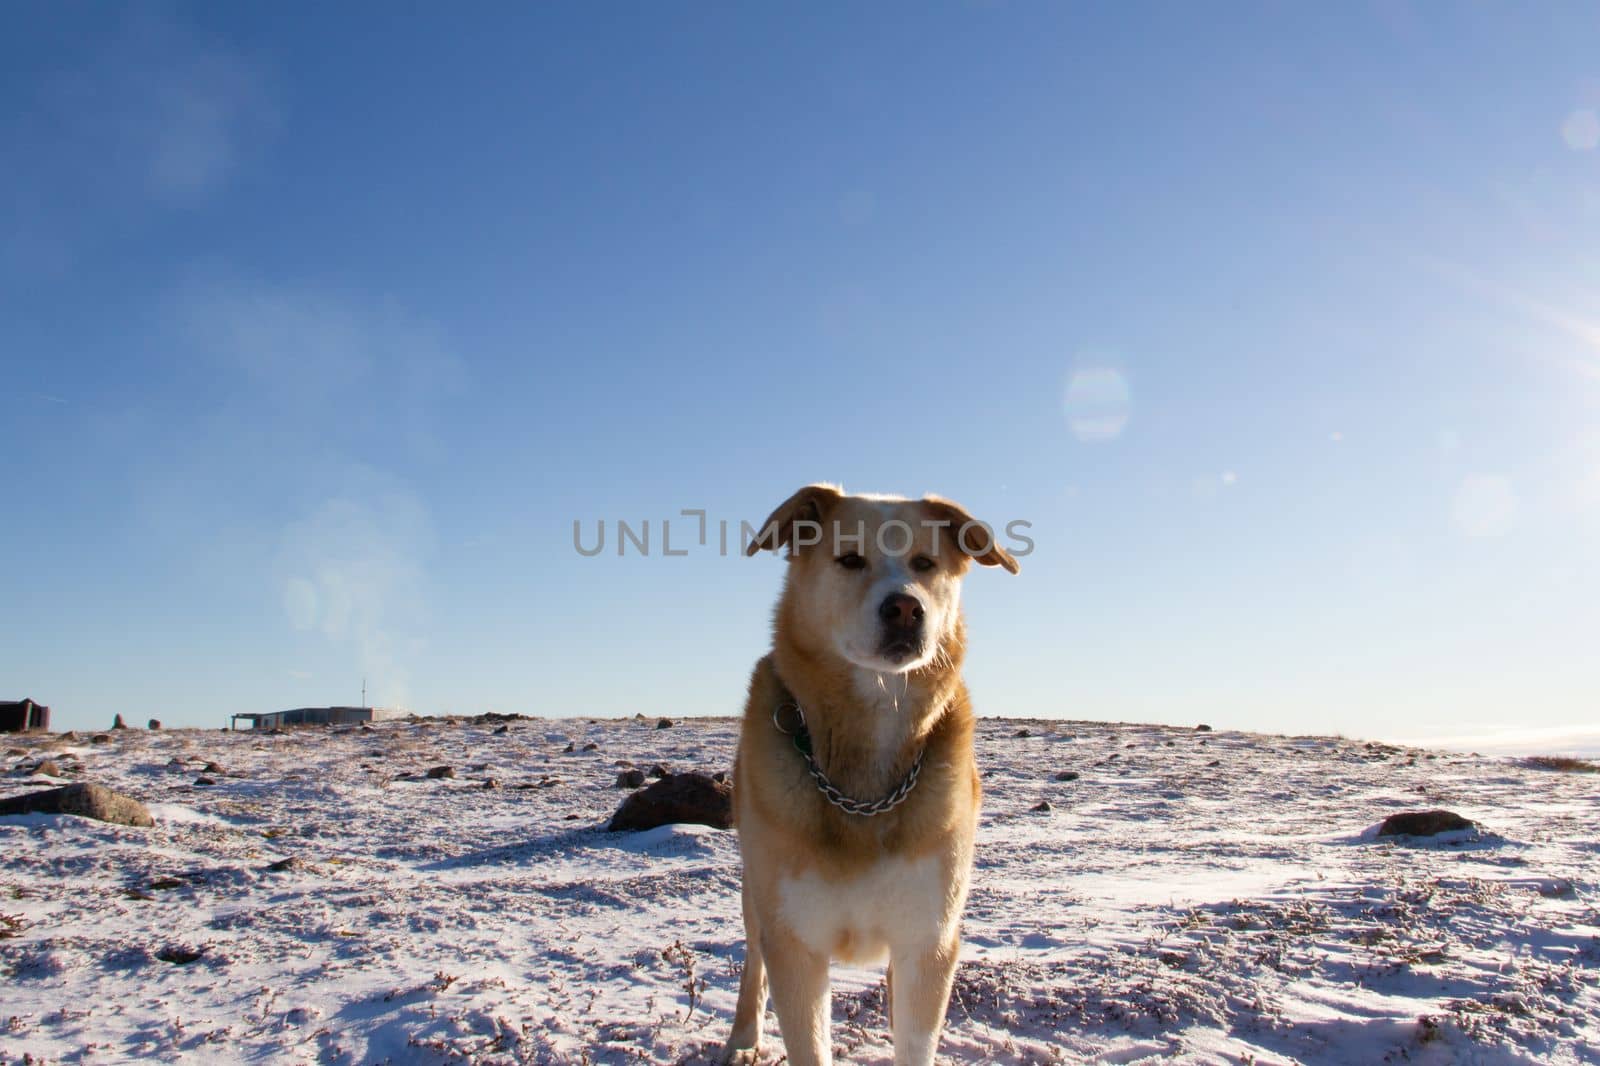 A yellow Labrador dog standing on snow in a cold arctic landscape, near Arviat, Nunavut Canada